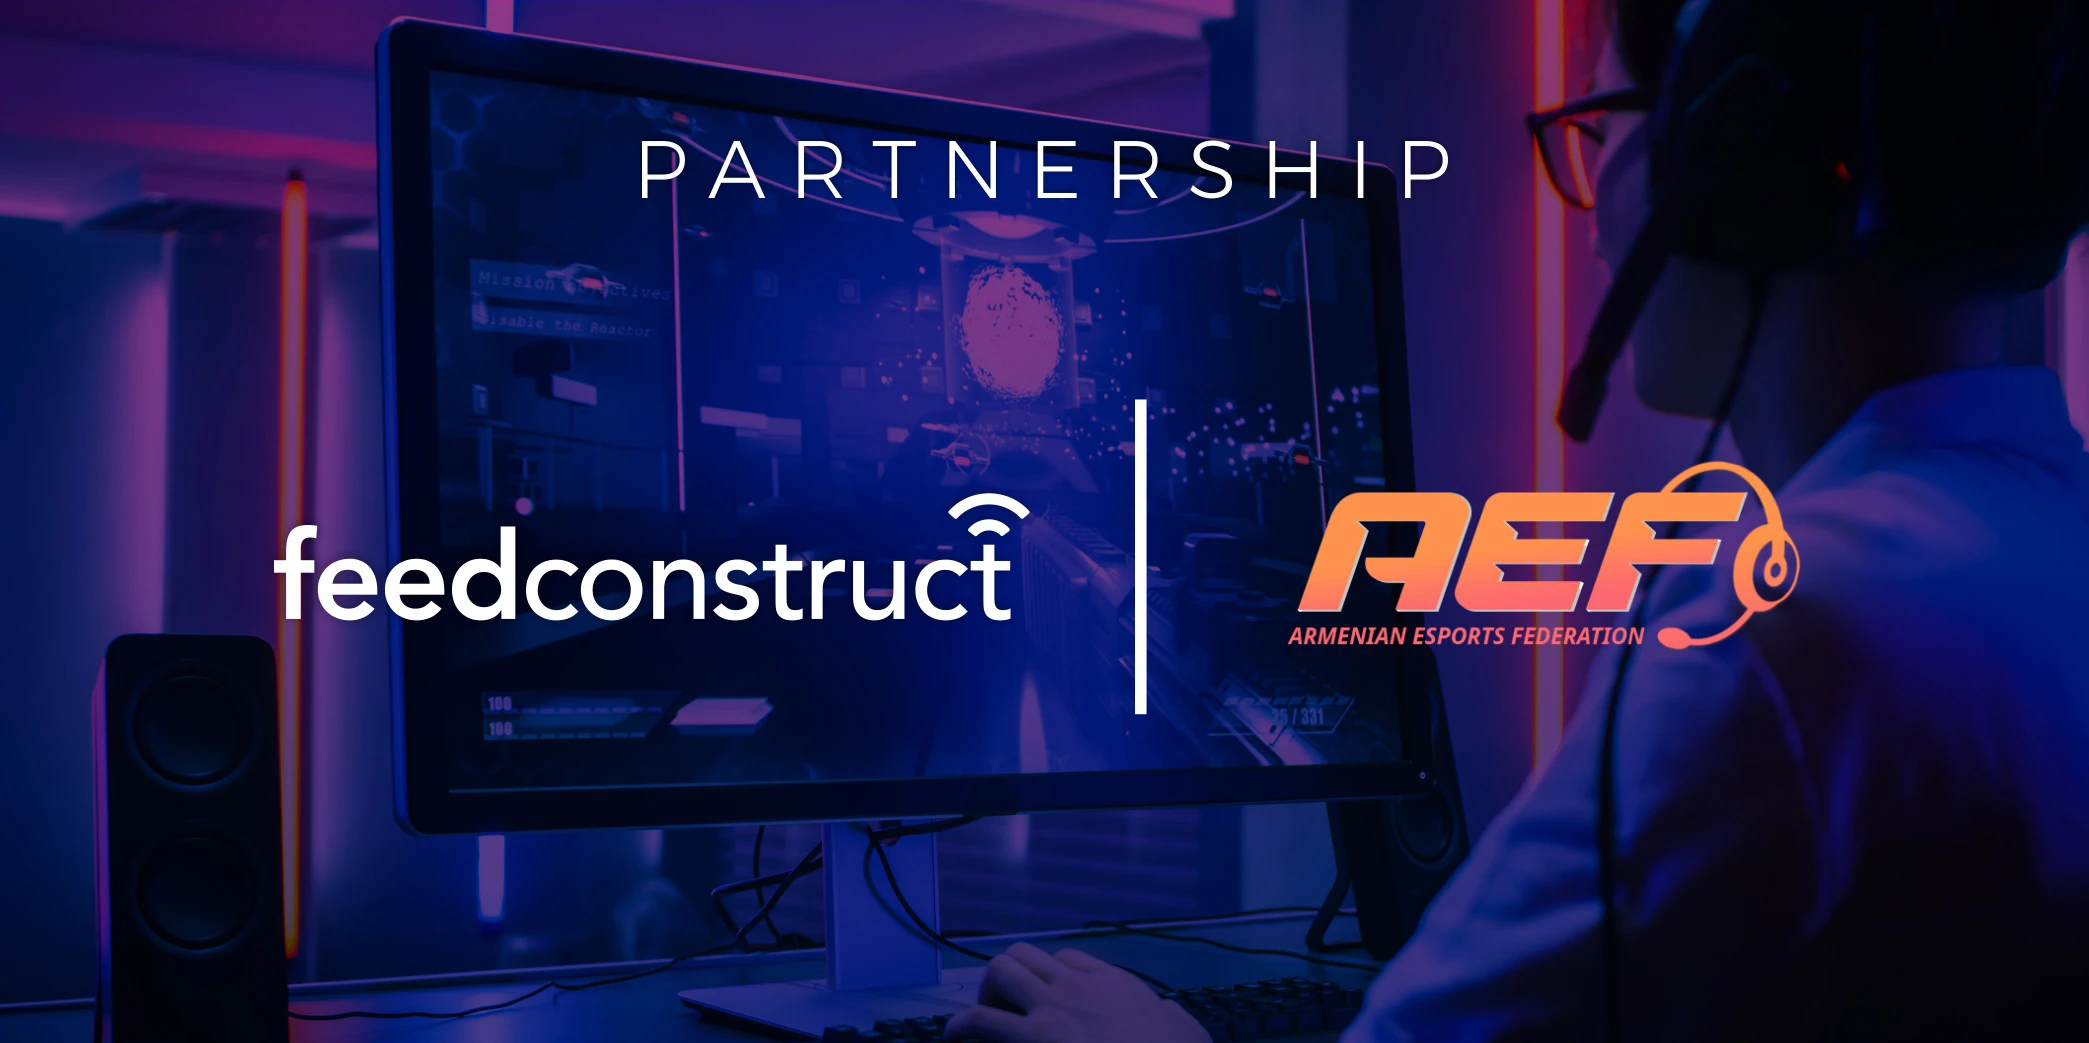 FeedConstruct Cooperates With AEF for EILAT 2021 National Qualifiers